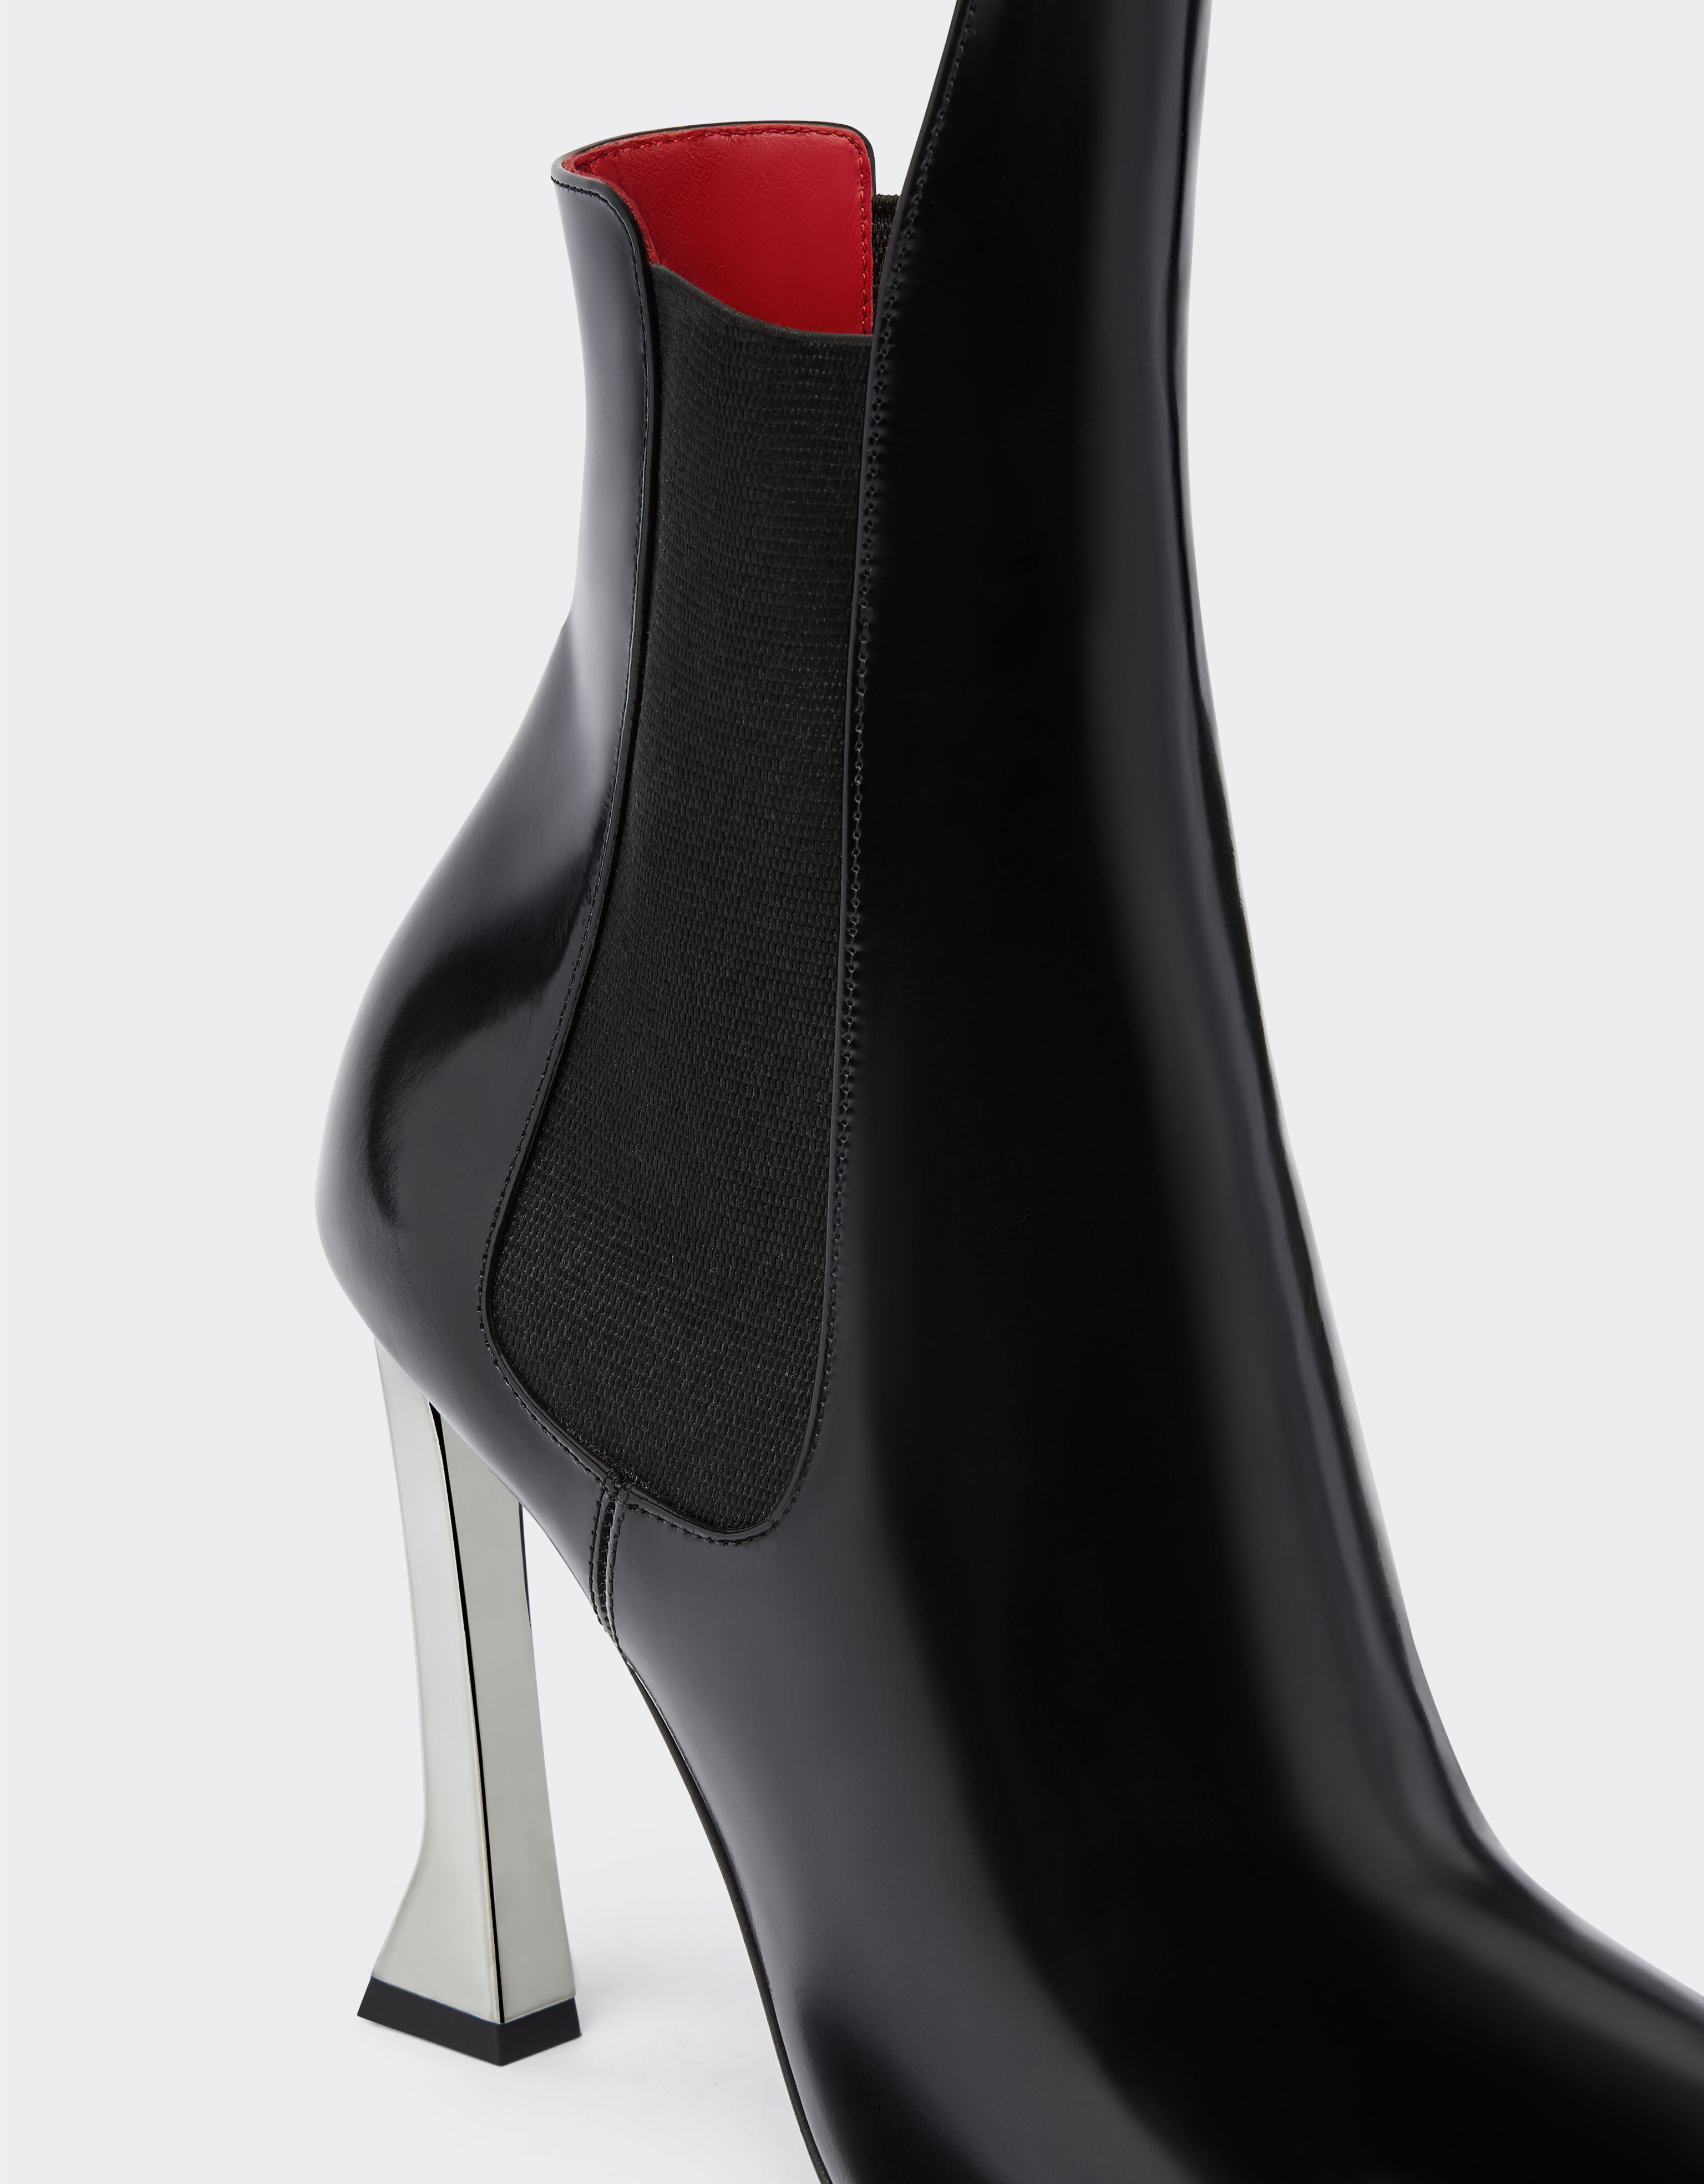 Ferrari Ankle boots in brushed leather Black 20499f